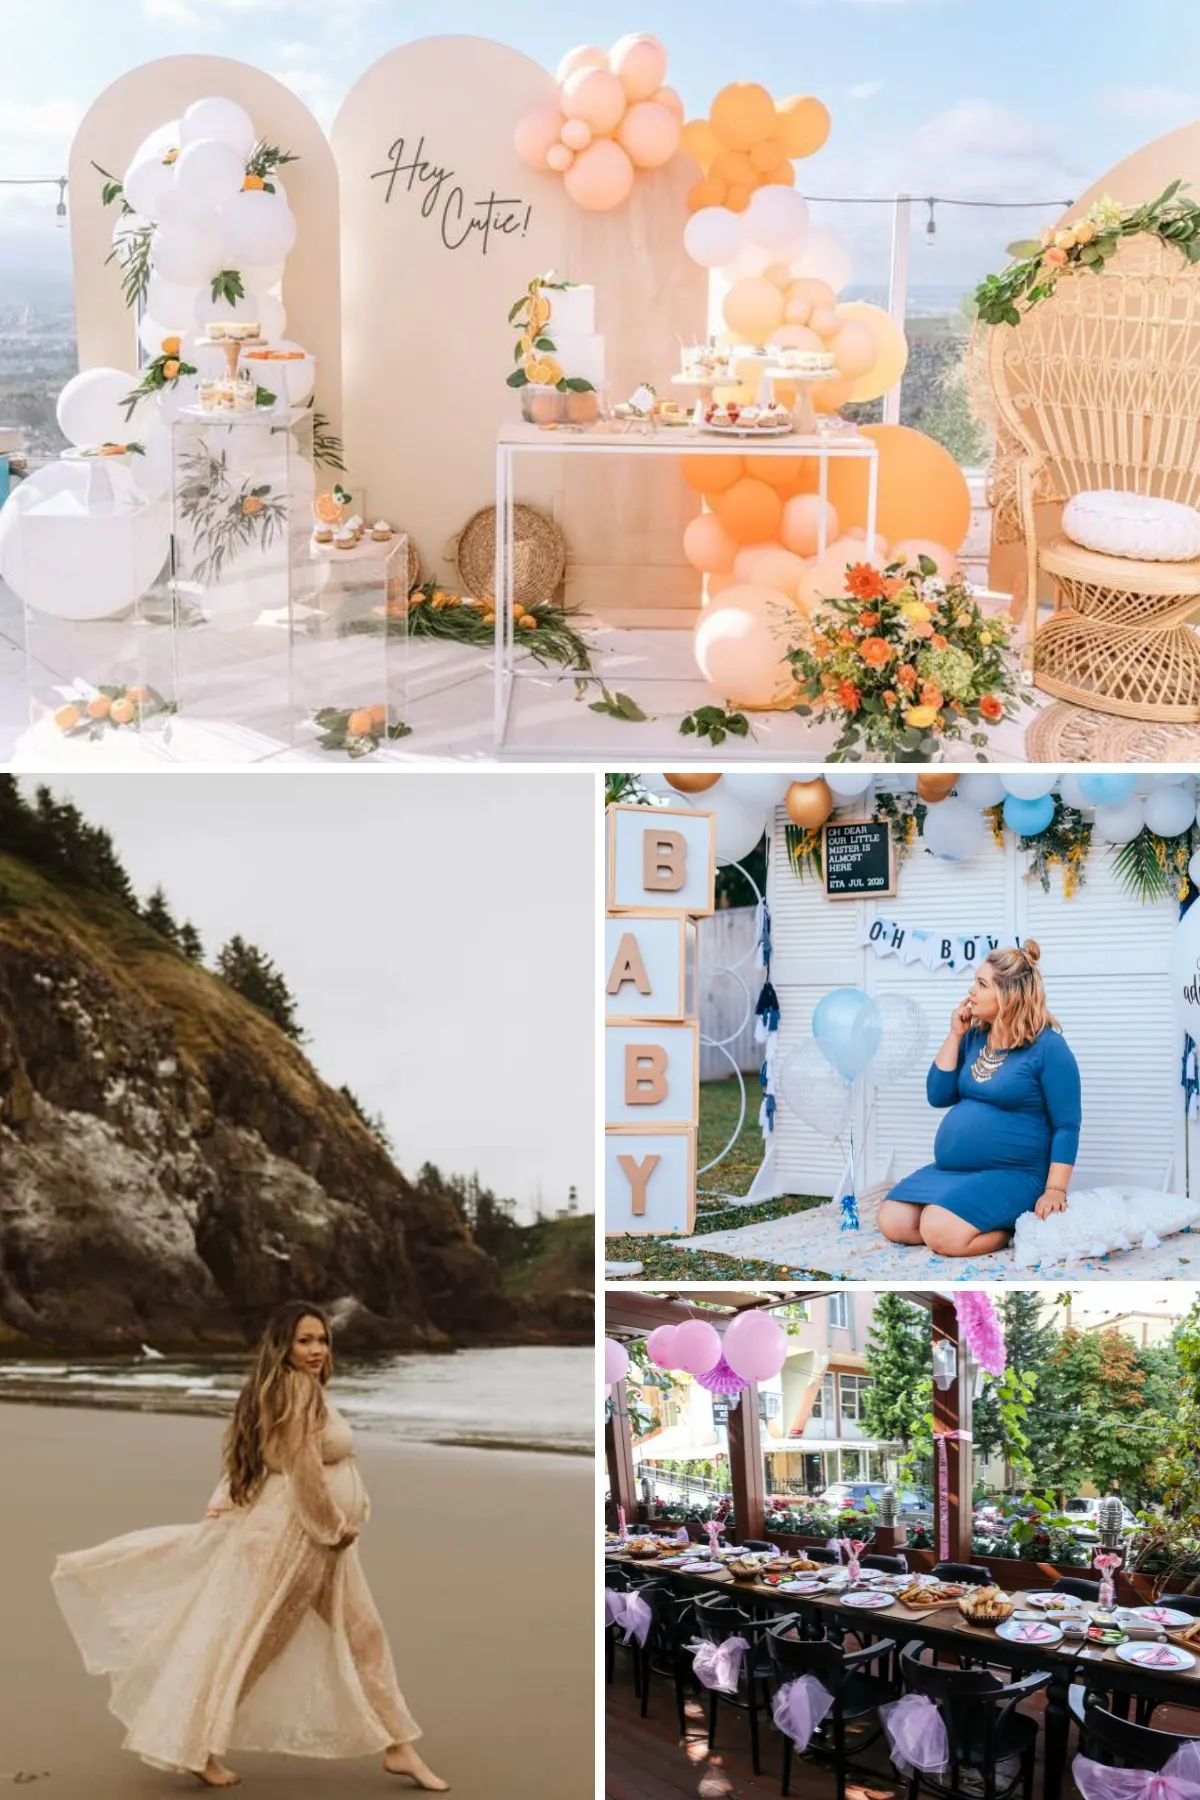 Collage of outdoor baby shower venues including a rooftop terrace, beach, backyard, and patio.